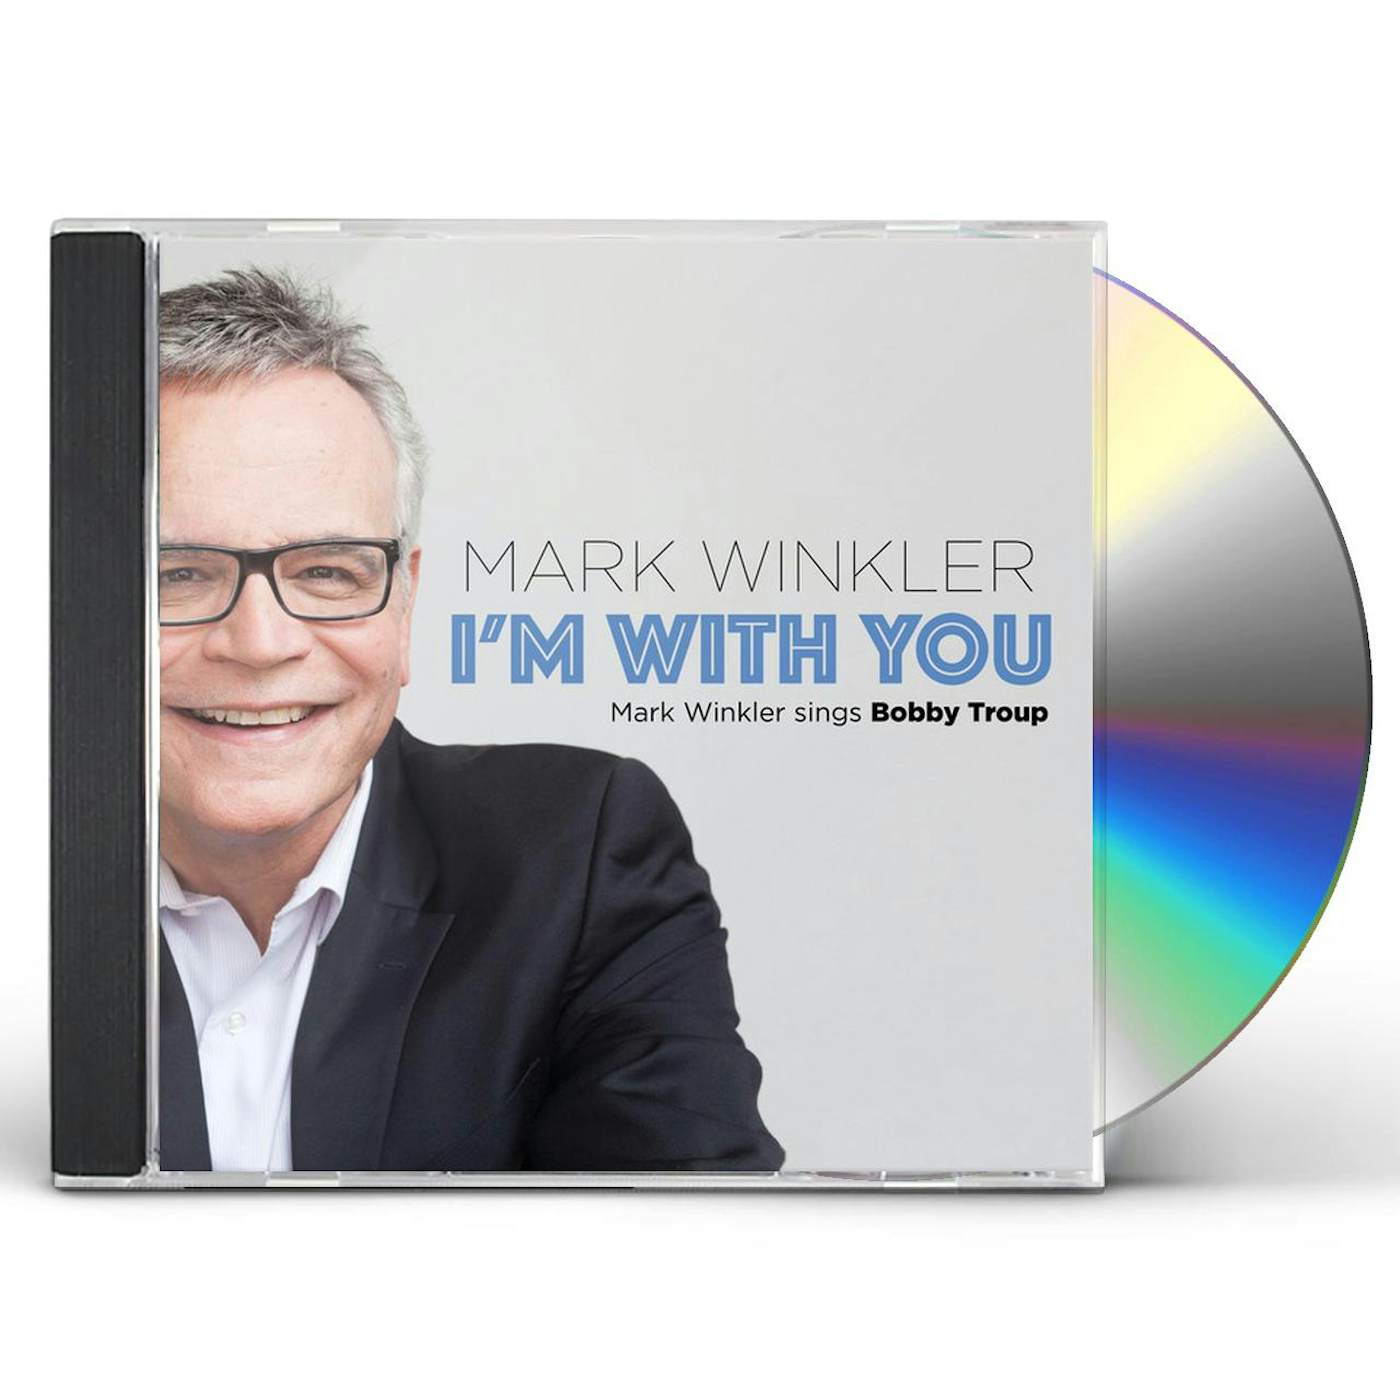 I'M WITH YOU: MARK WINKLER SINGS BOBBY TROUP CD